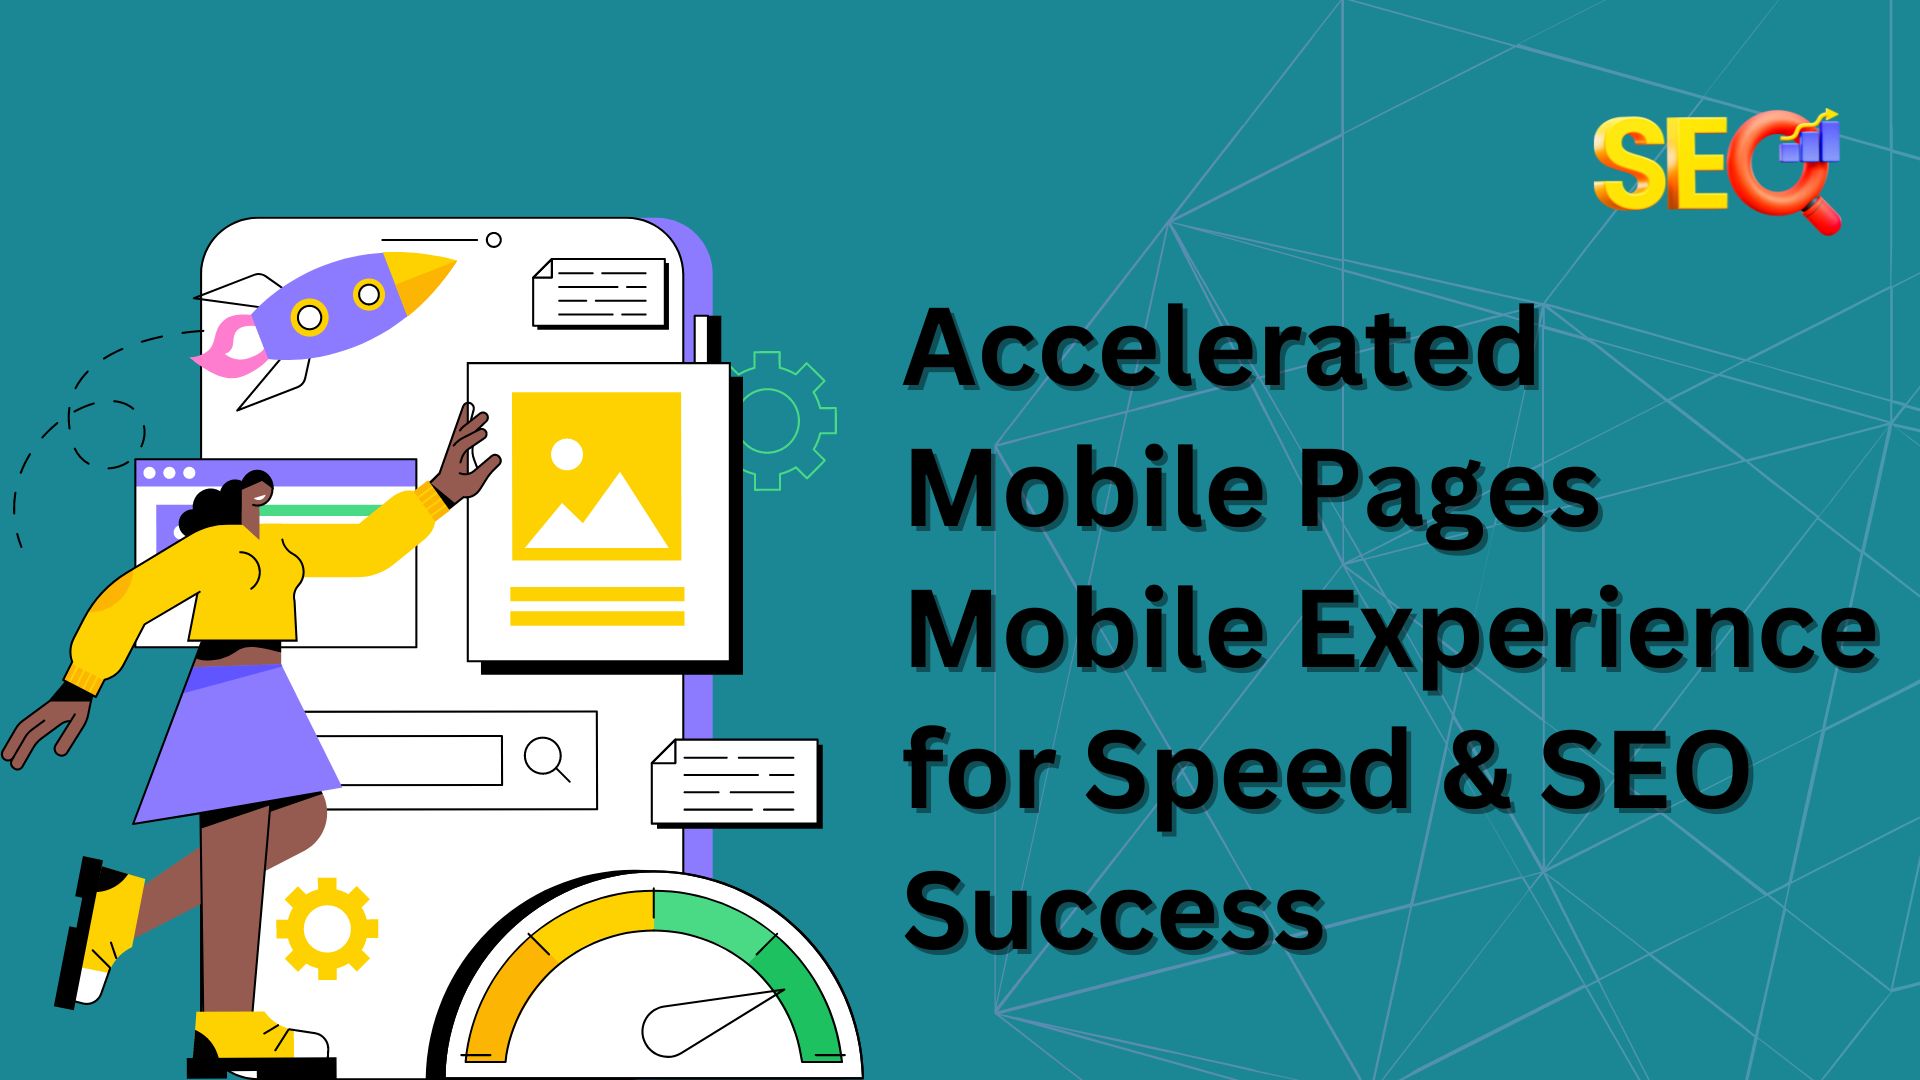 Accelerated Mobile Pages - Mobile Experience for Speed & SEO Success